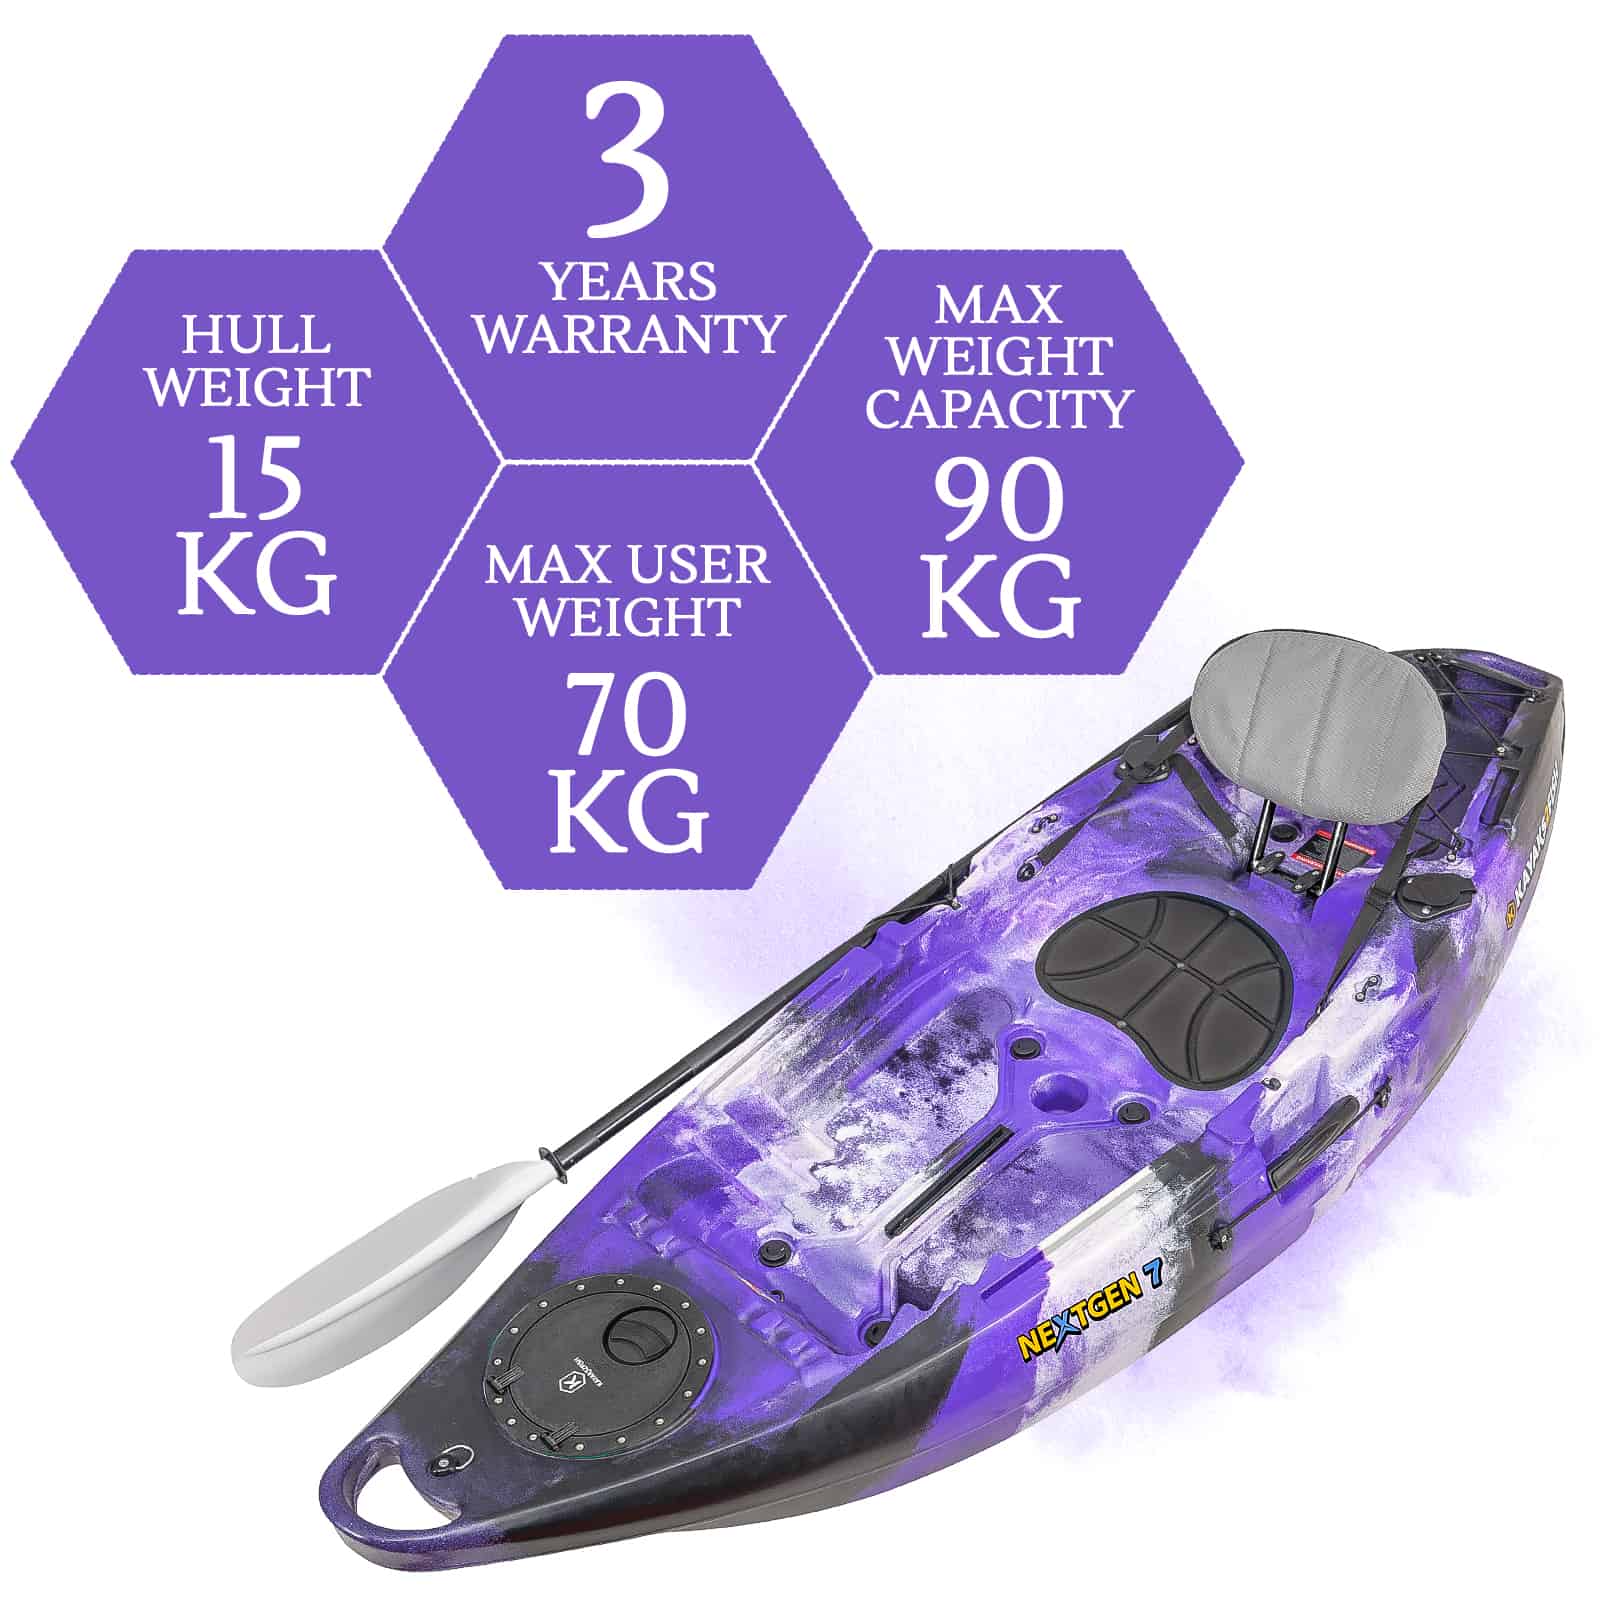 NGB-07-PURPLECAMO specifications